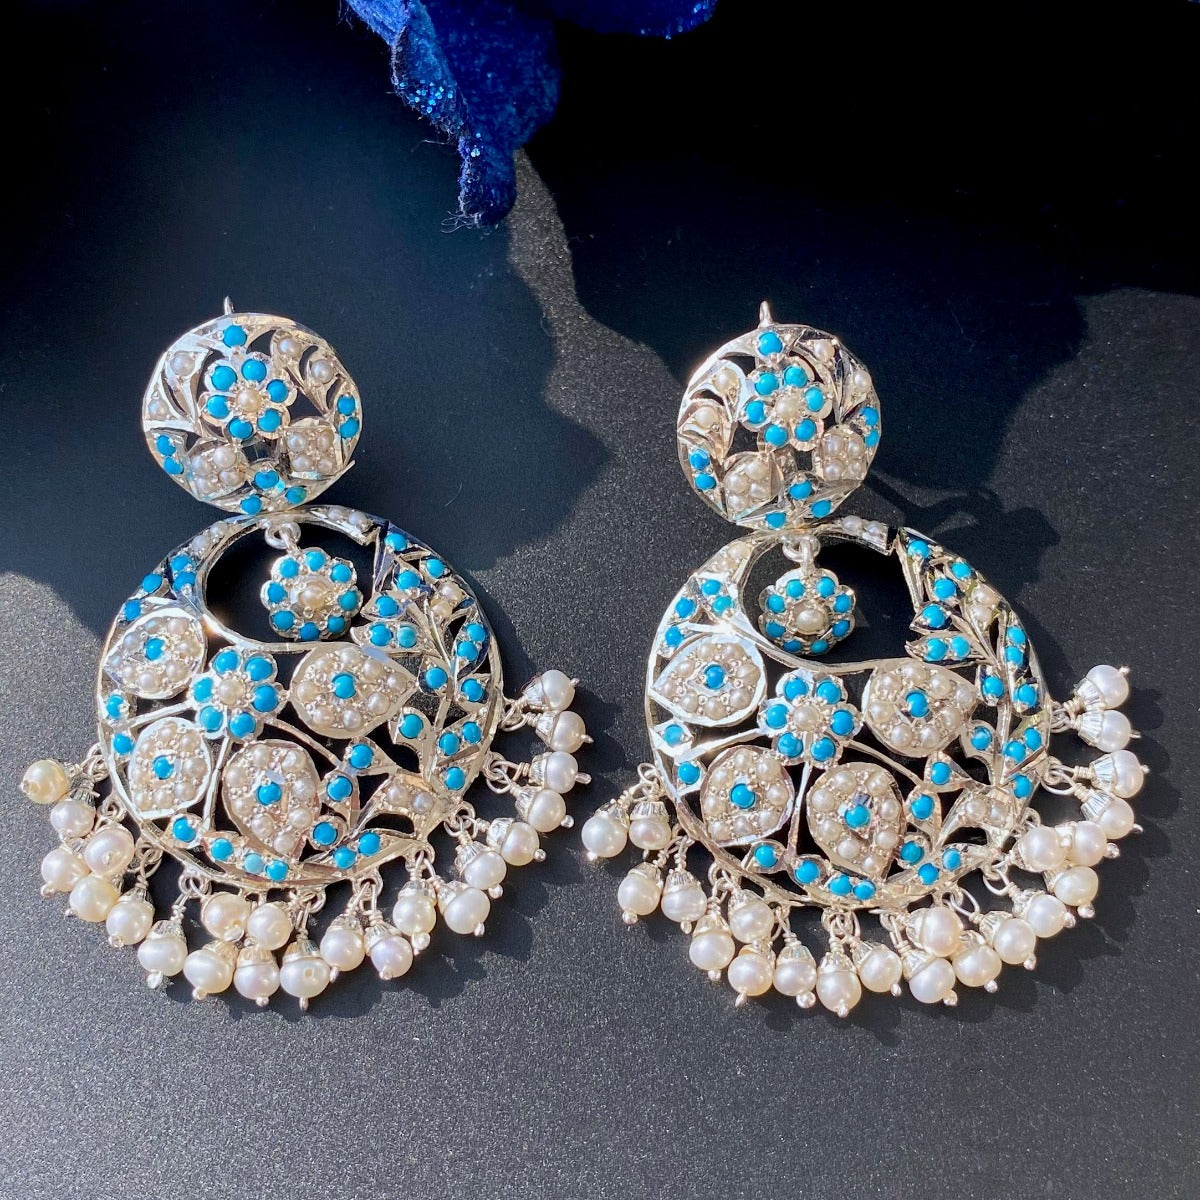 kashmiri design earrings in silver with pearls and feroza